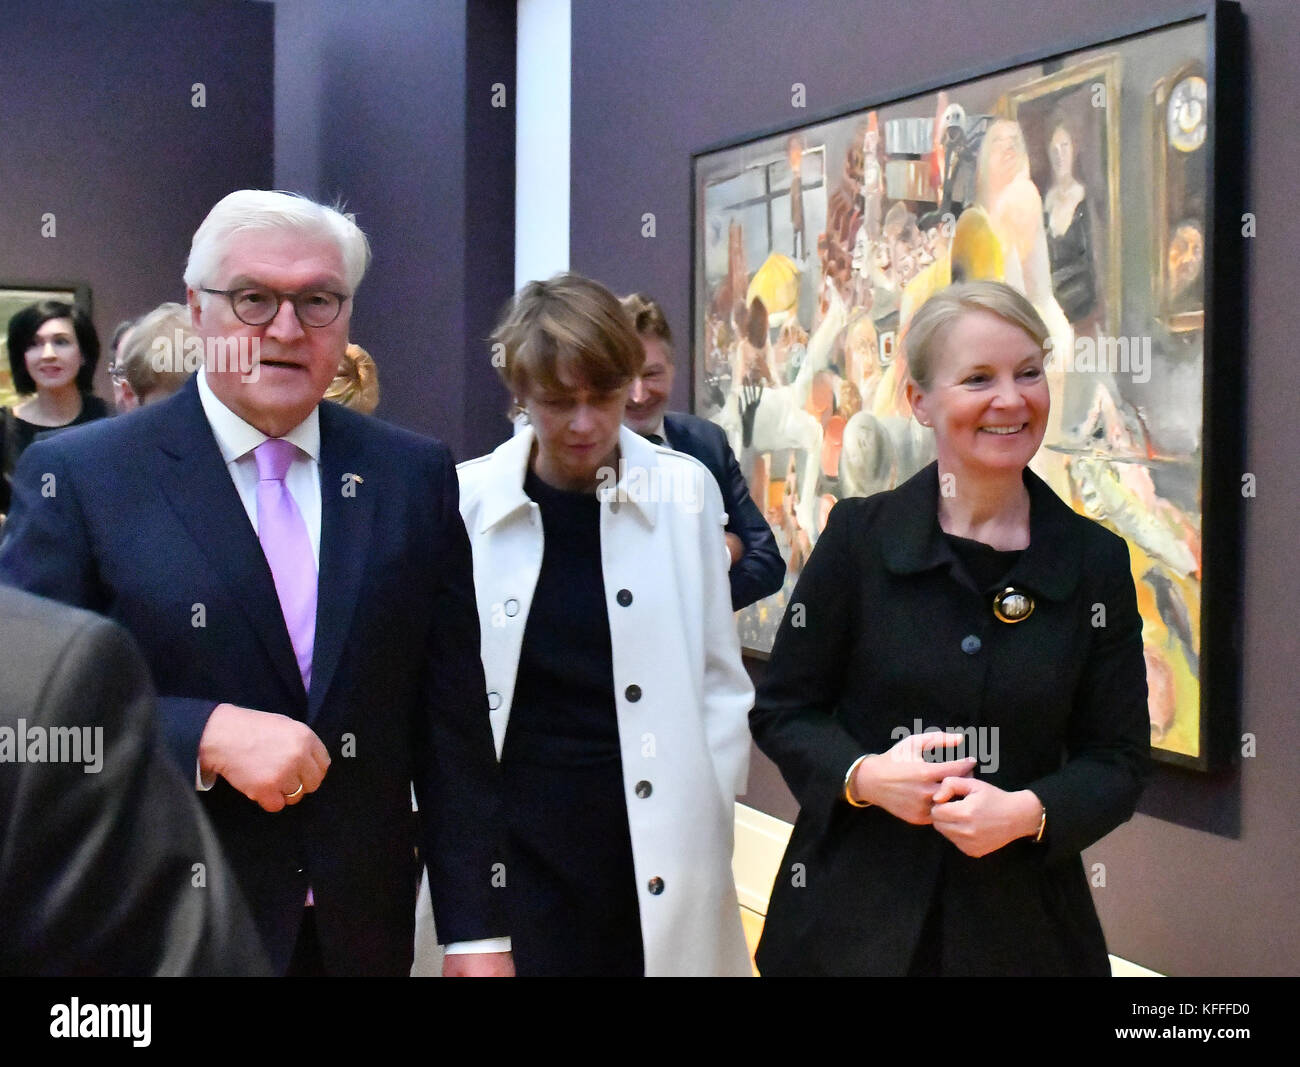 German president Frank Walter Steinmeier, his wife Elke Büdenbender (C) and museum direcotr Ortrud Westheider walk past a painting by Bernhard Heisig displayed at the 'Behind the Mask: Artists in the GDR' exhibition in Potsdam, Germany, 26 October 2017. The exhibition takes a look at the self-portrayal of artists in the GDR. Photo: Bernd Settnik/dpa Stock Photo